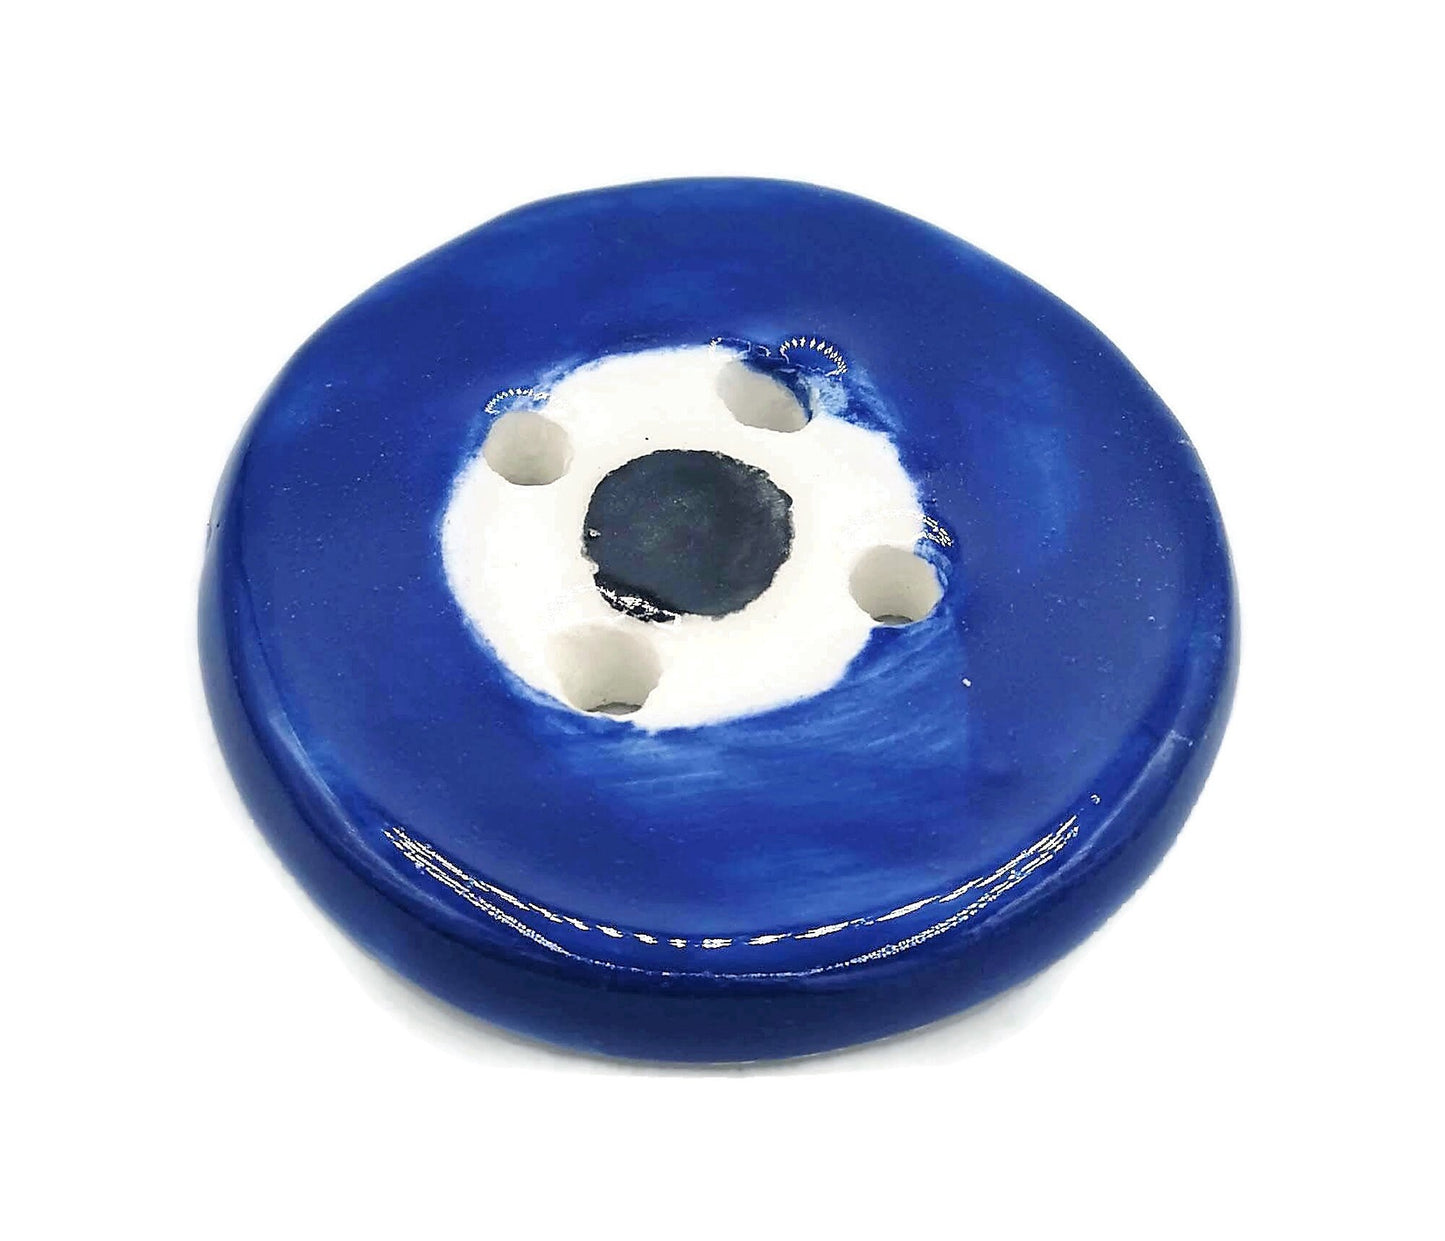 Evil Eye Buttons, 1 Pc Sewing Buttons Round Shape For Coat, Blouse & Crafts - Ceramica Ana Rafael